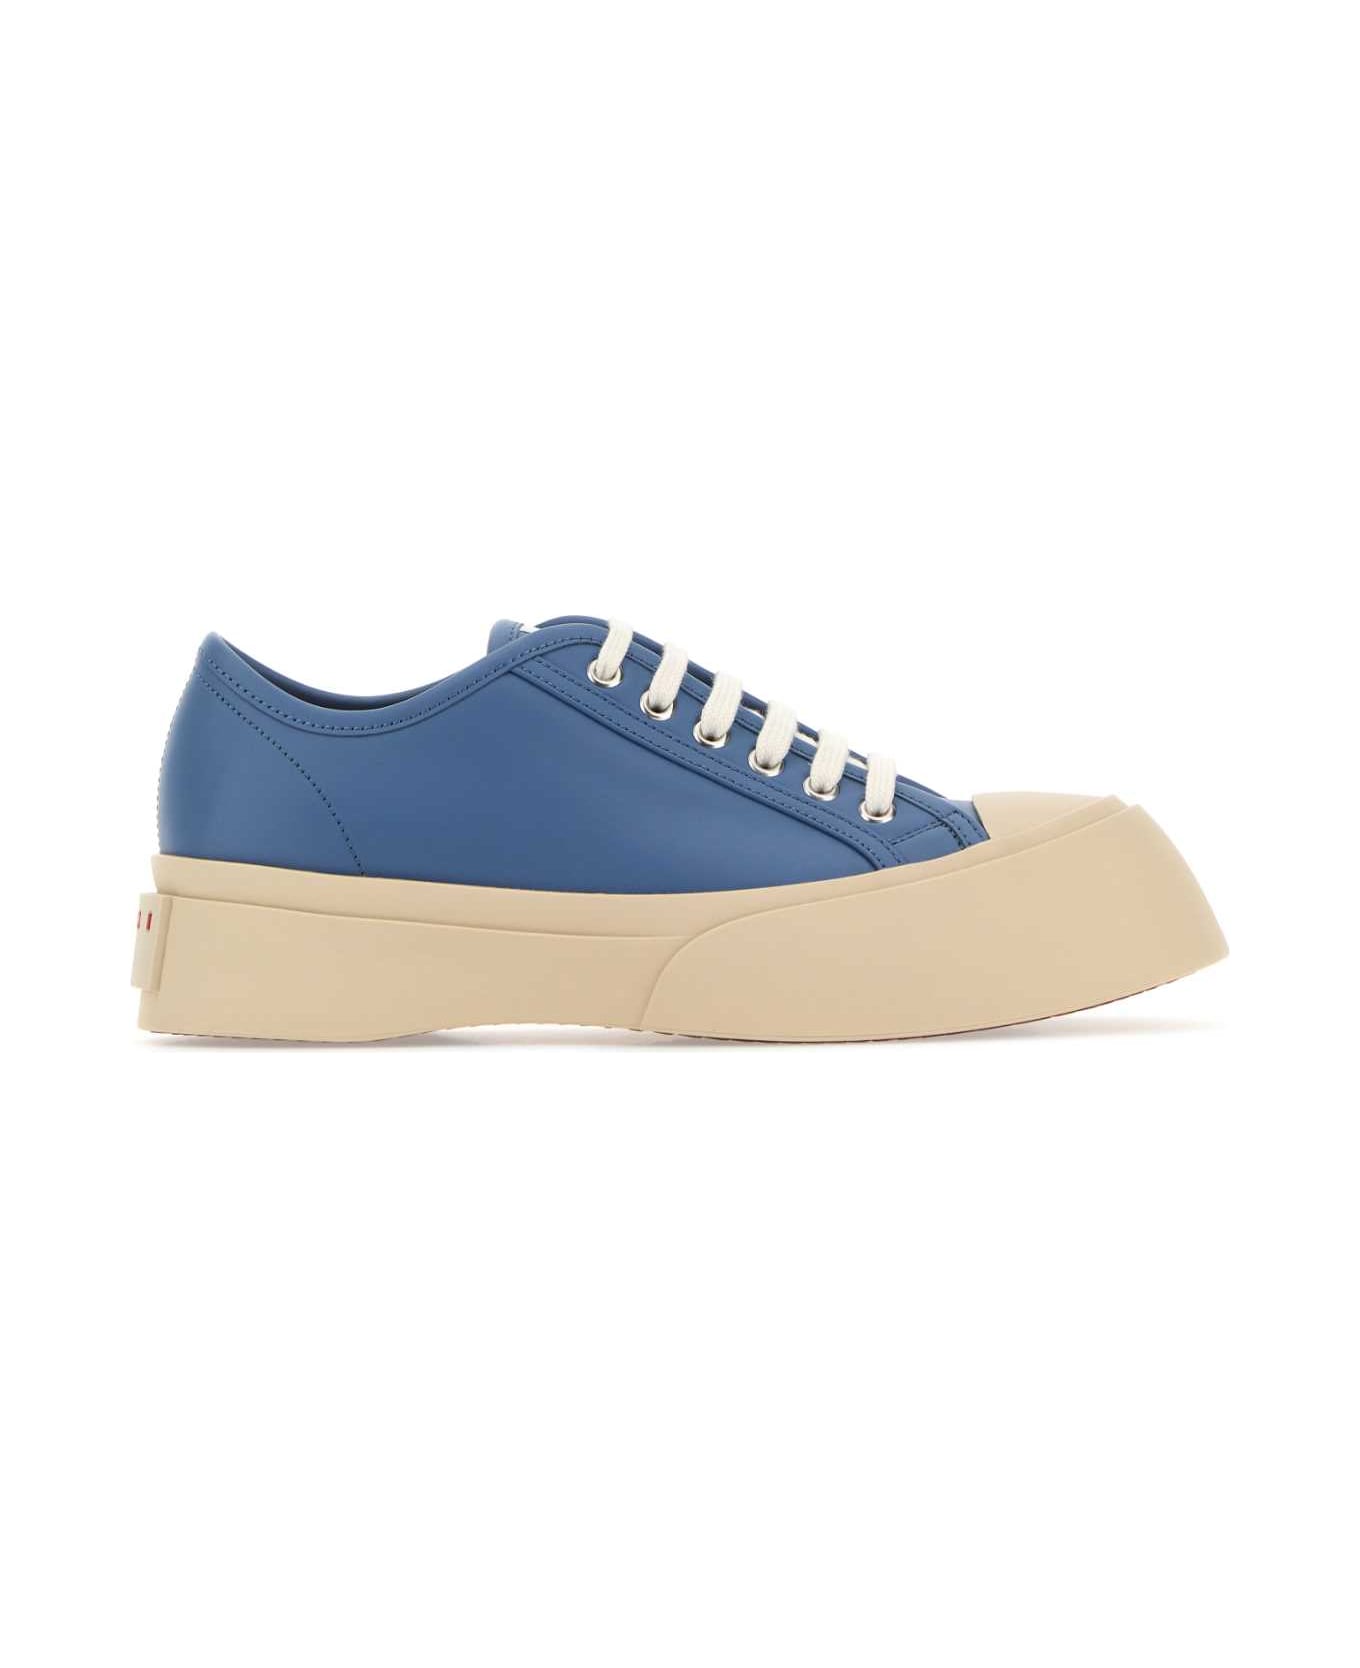 Marni Cerulean Blue Leather Pablo Sneakers - 00B37